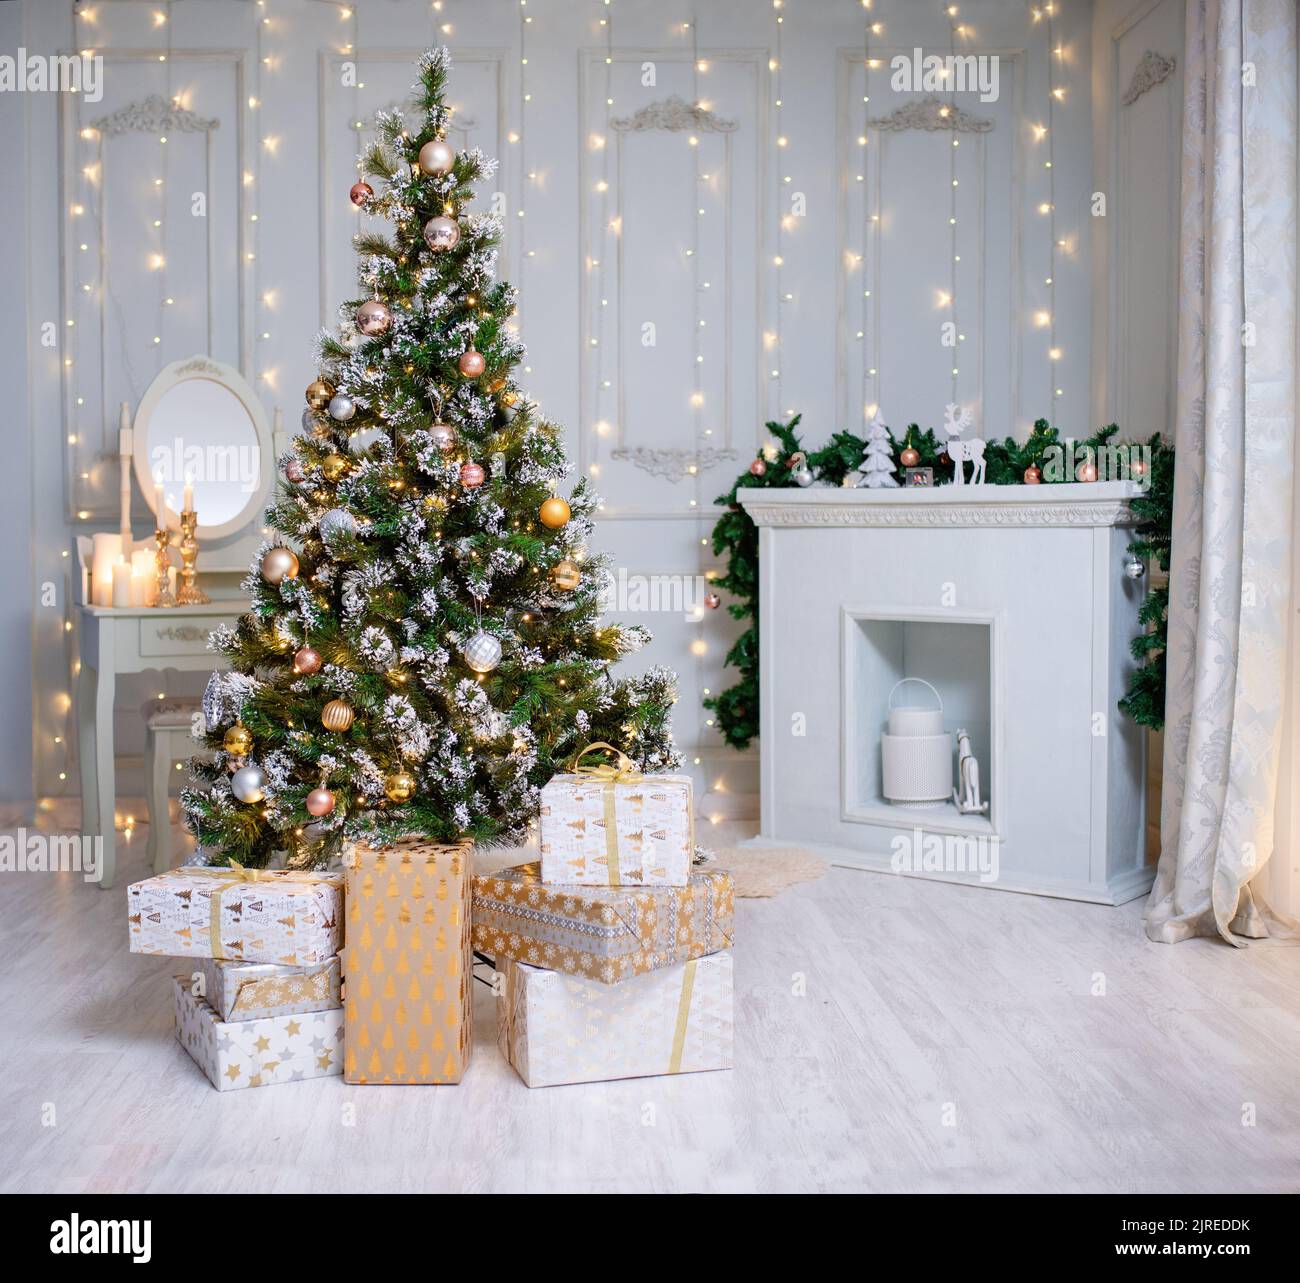 Beautiful holdiay decorated room with Christmas tree with presents under it. Stock Photo